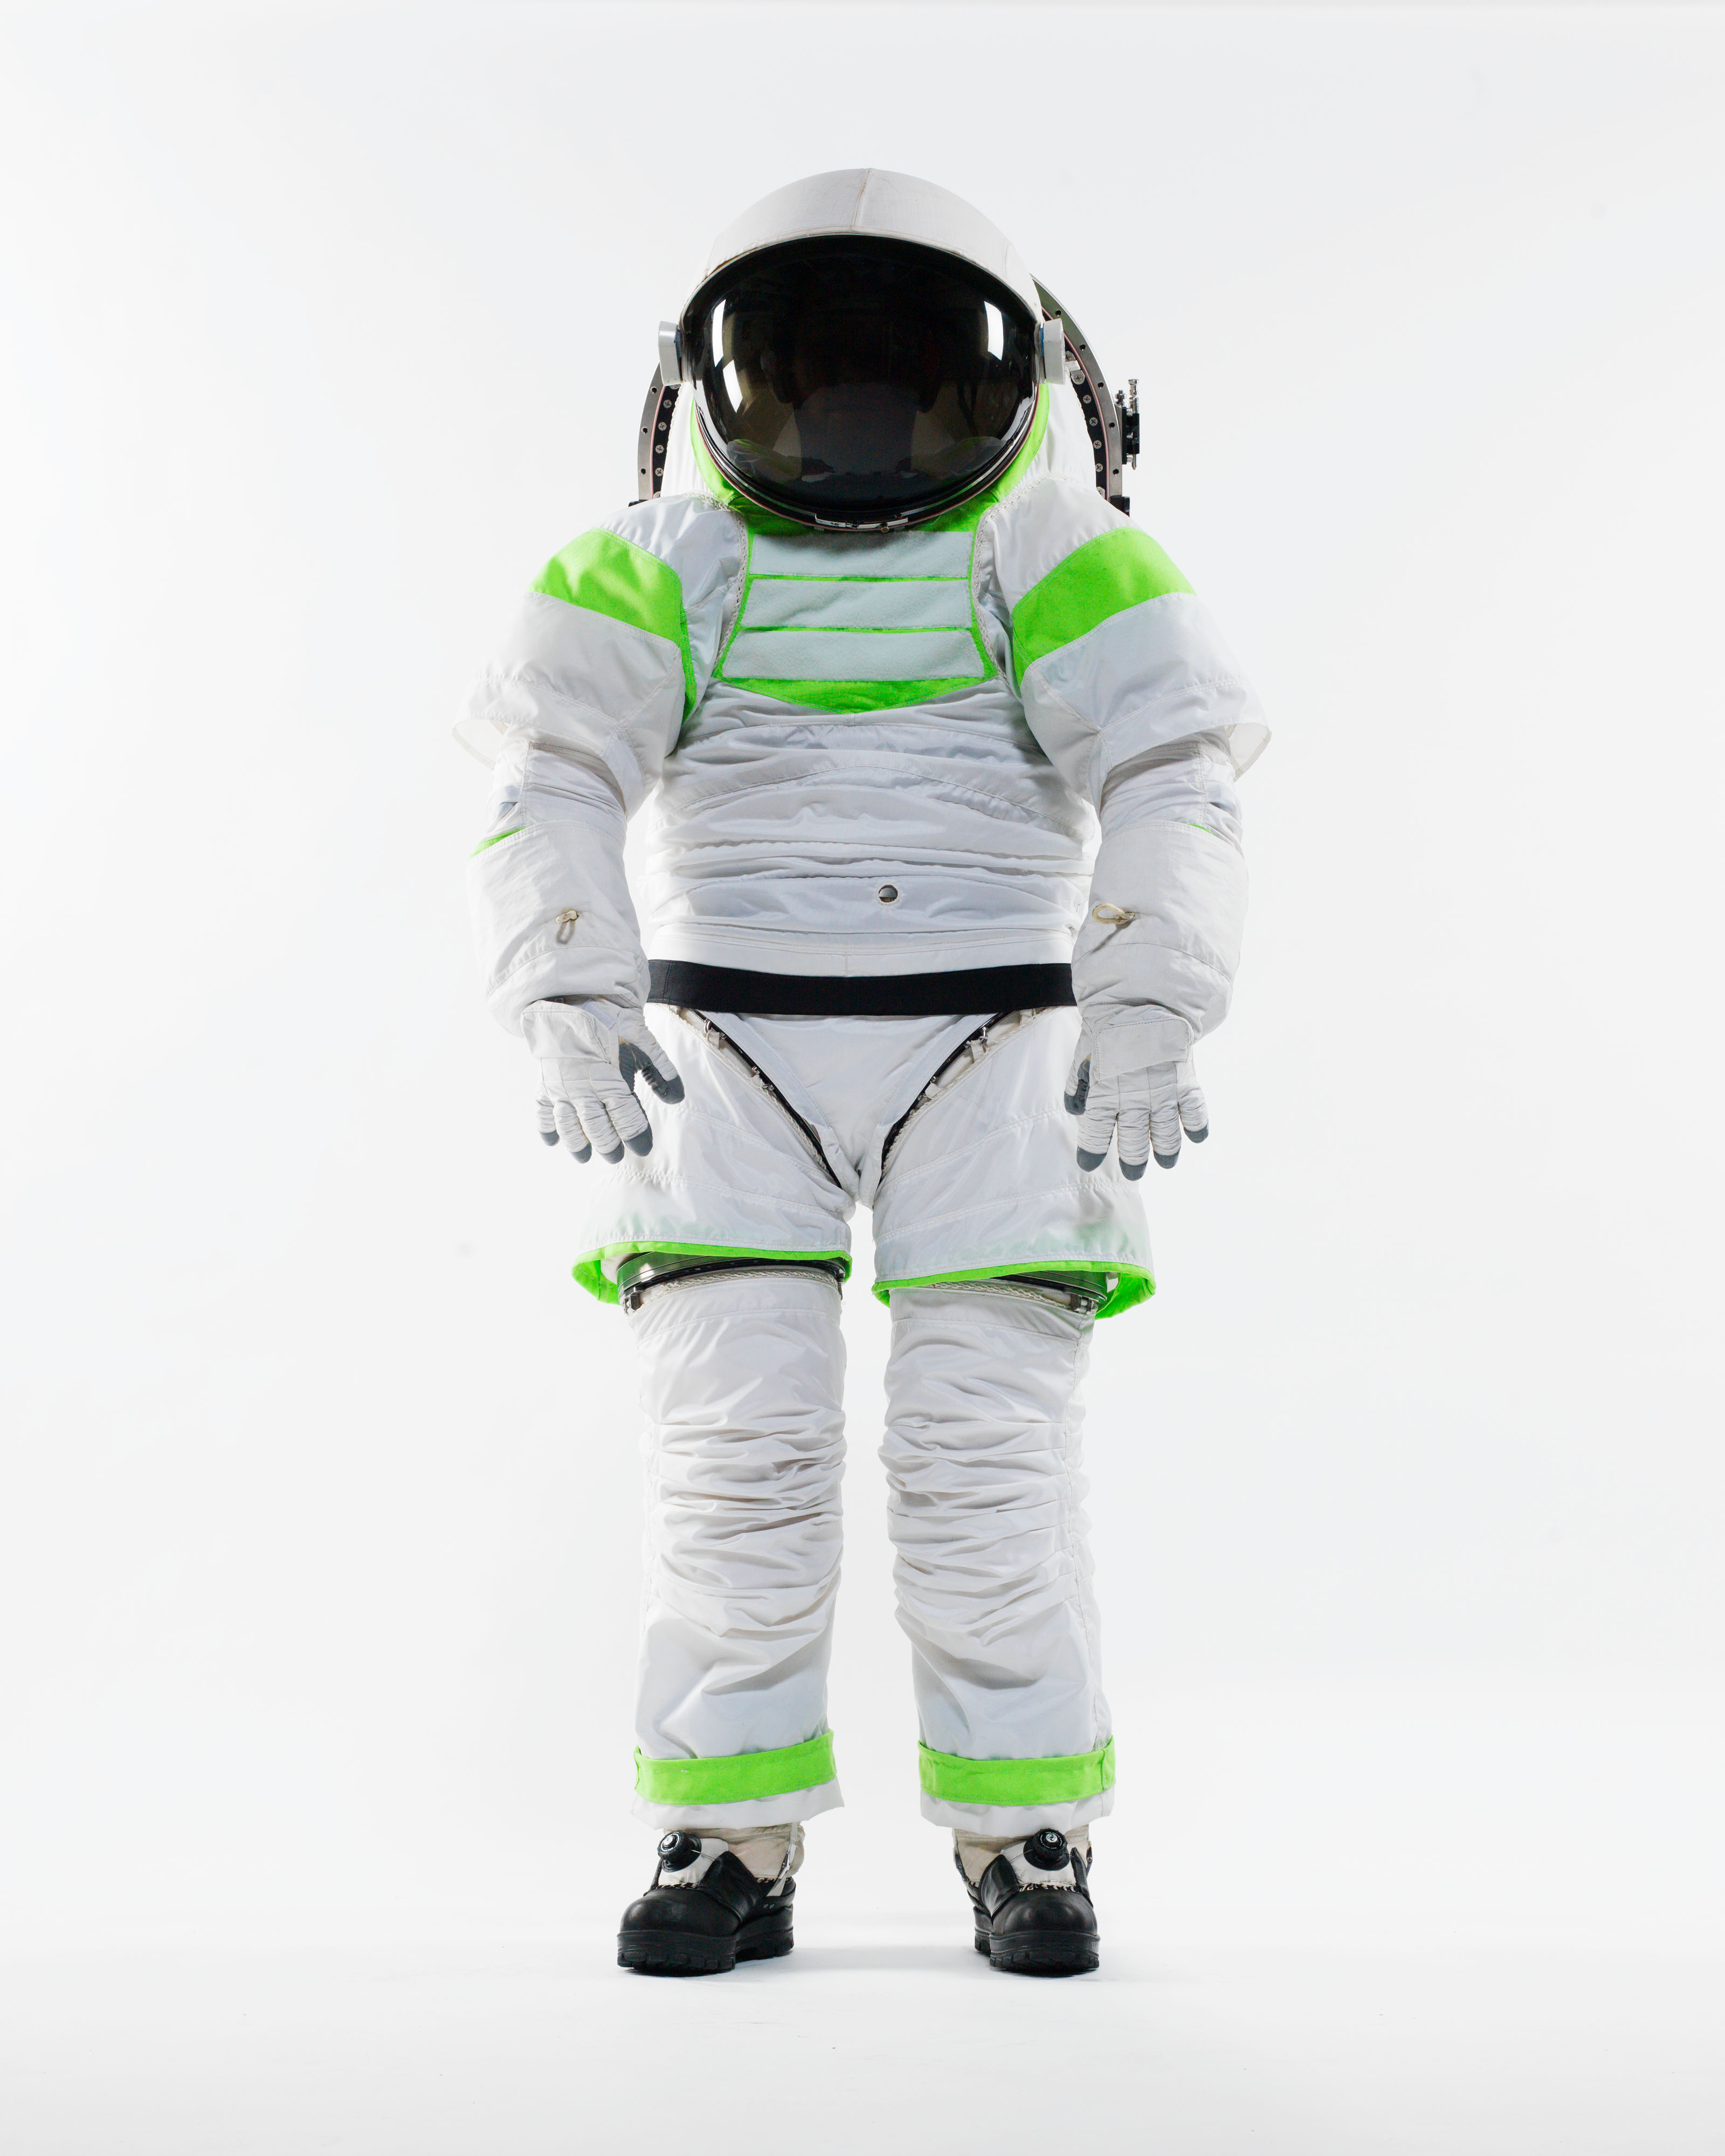 ILC Dover’s Z-1 spacesuit prototype replaced the Mark III hard structures with fabric while maintaining high mobility for planetary exploration  (Photo/NASA)